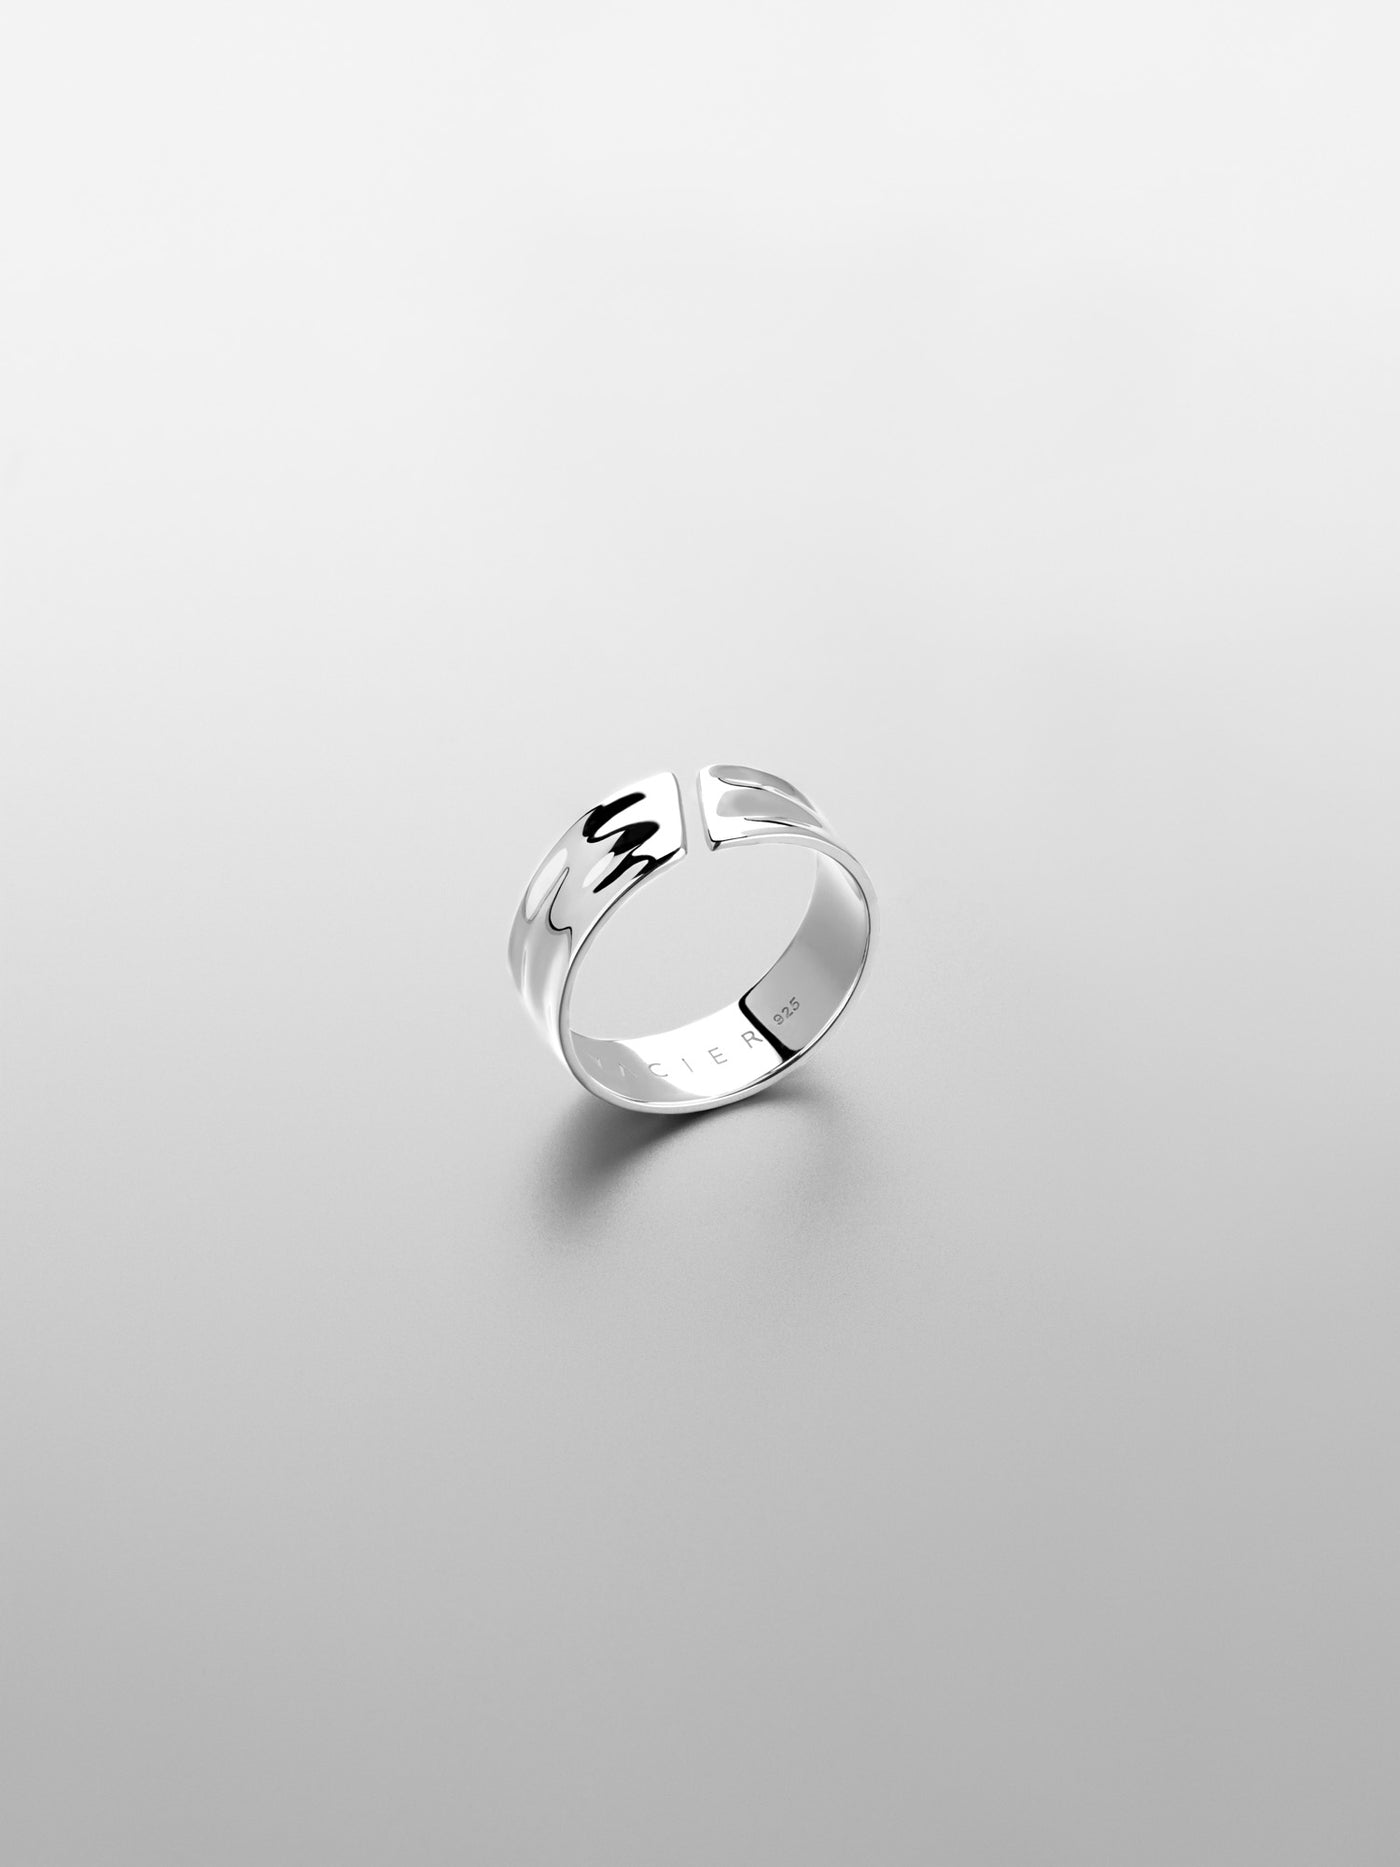 EXCLUSIVE UNISIZE RING IN SILVER